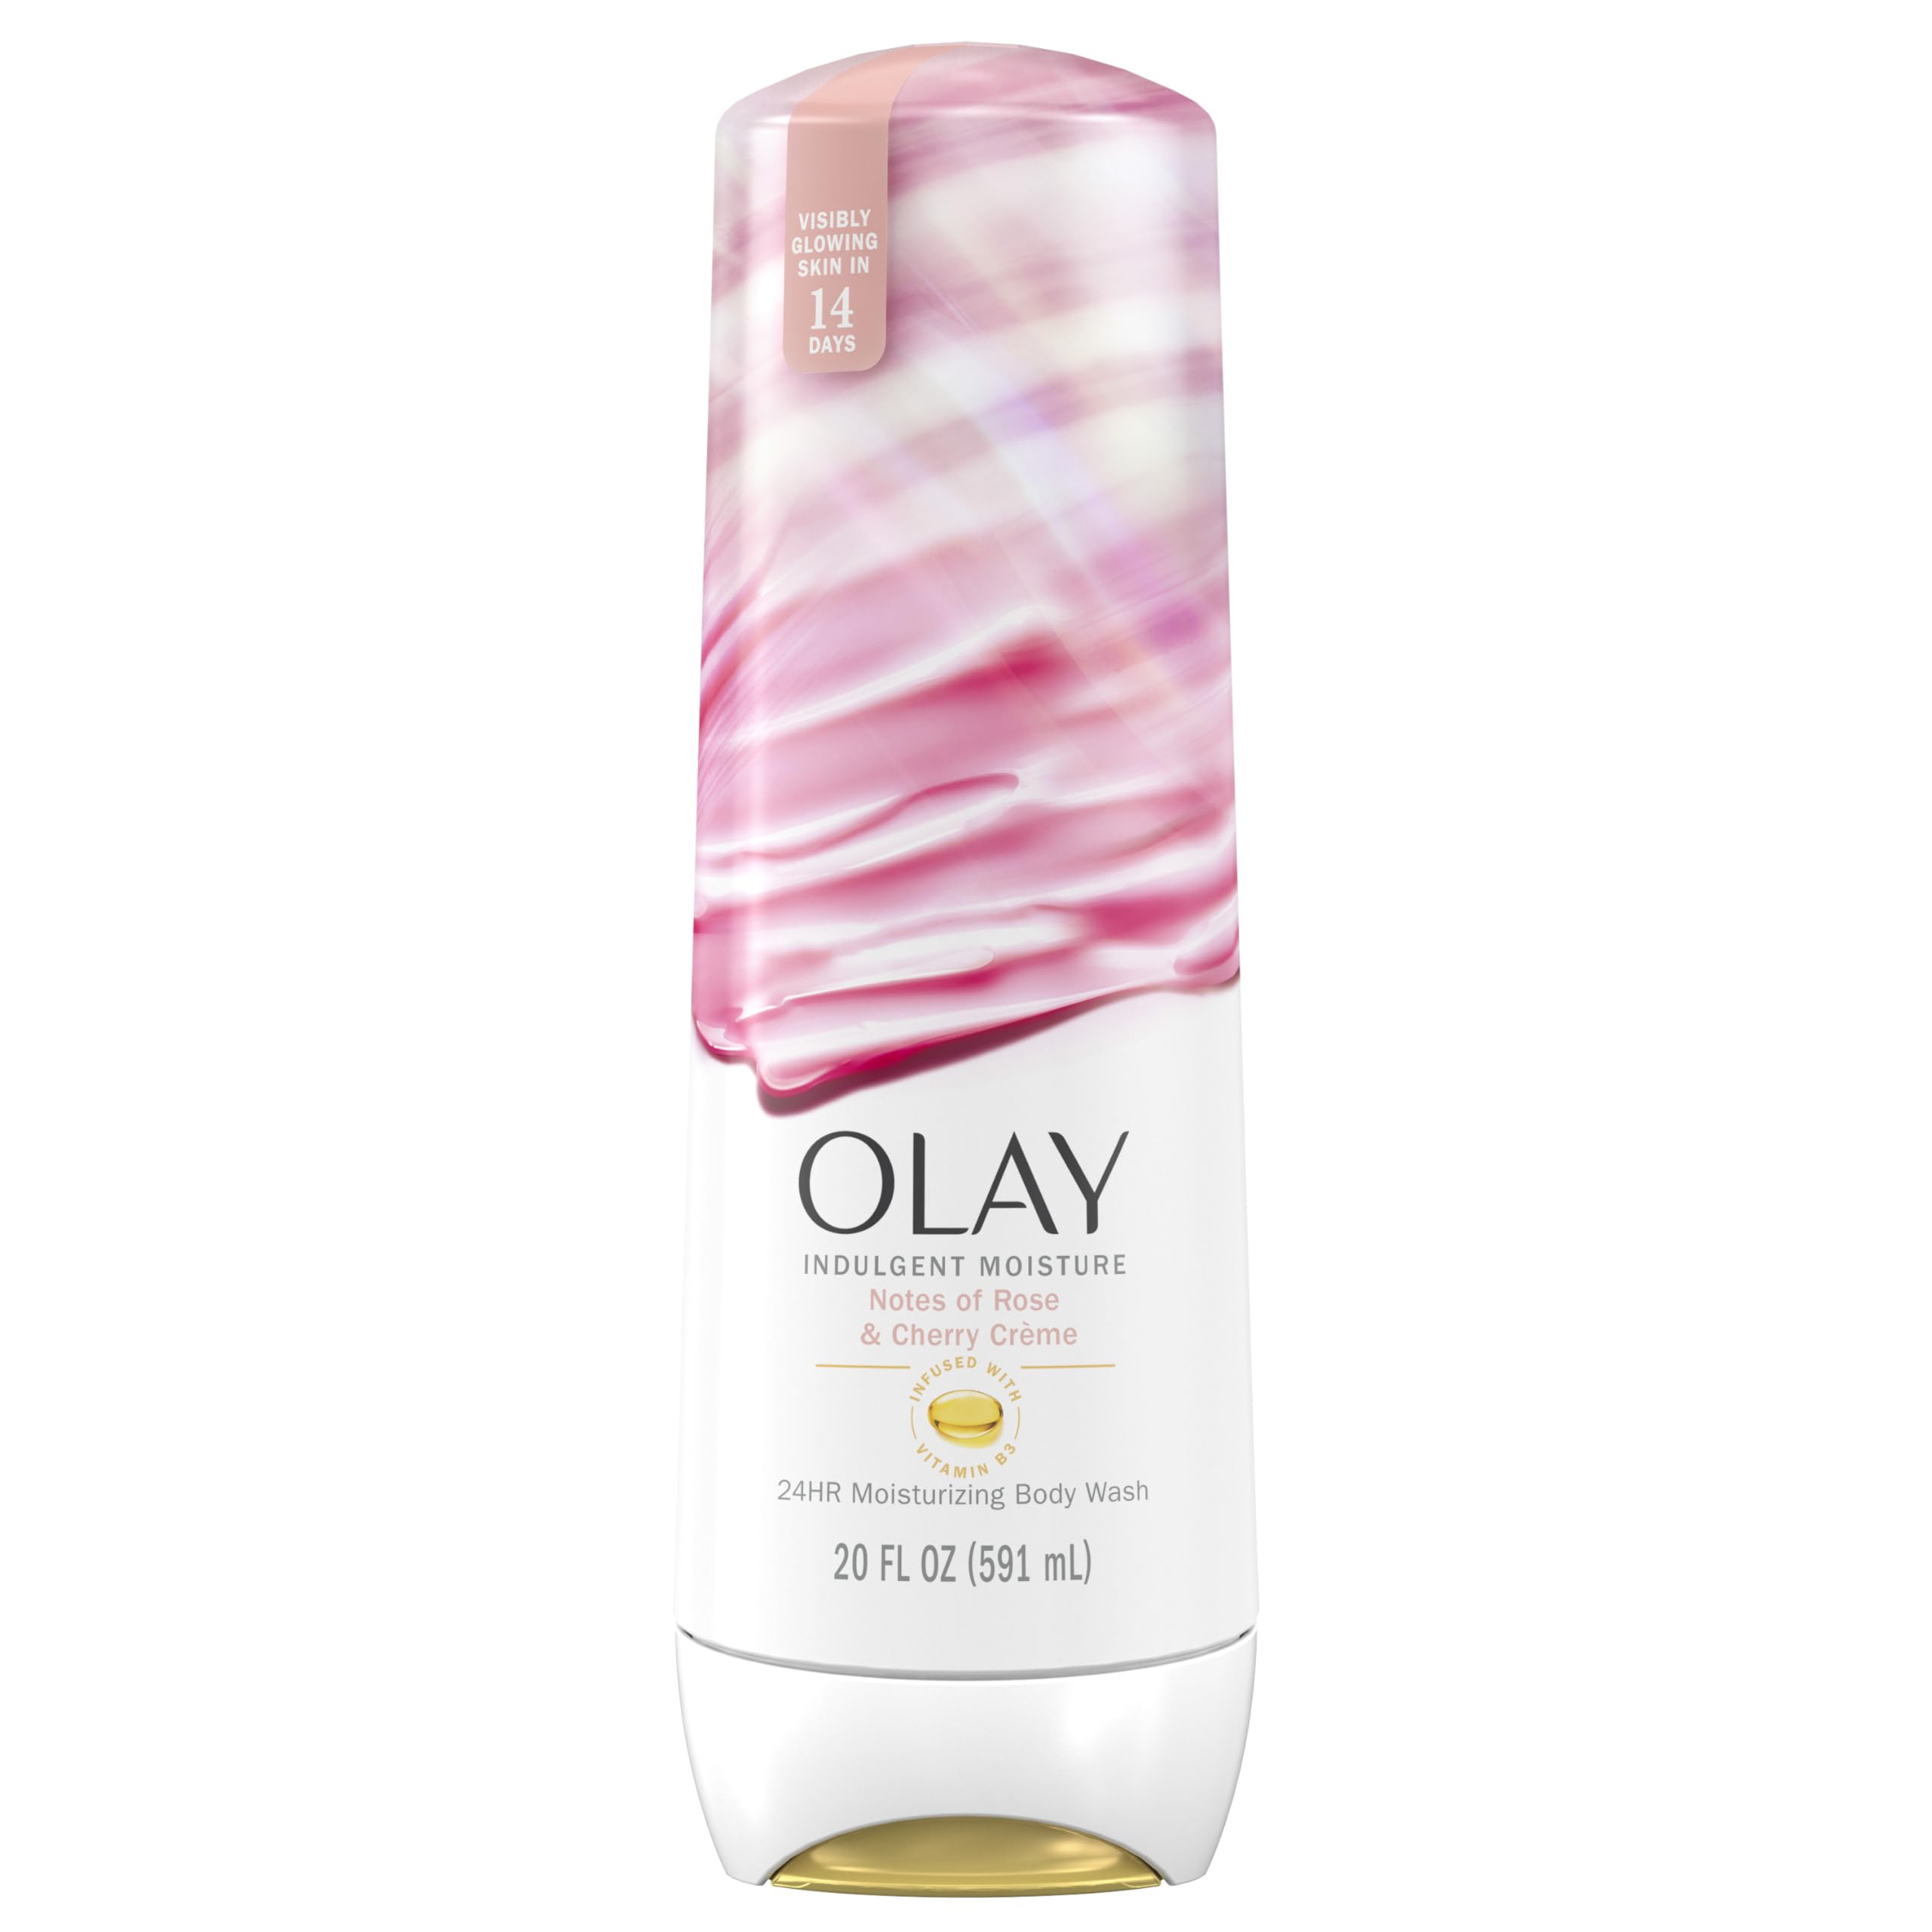 Olay Indulgent Moisture Body Wash for Women, Infused with Vitamin B3, Notes of Rose and Cherry Creme Scent, 20 fl oz